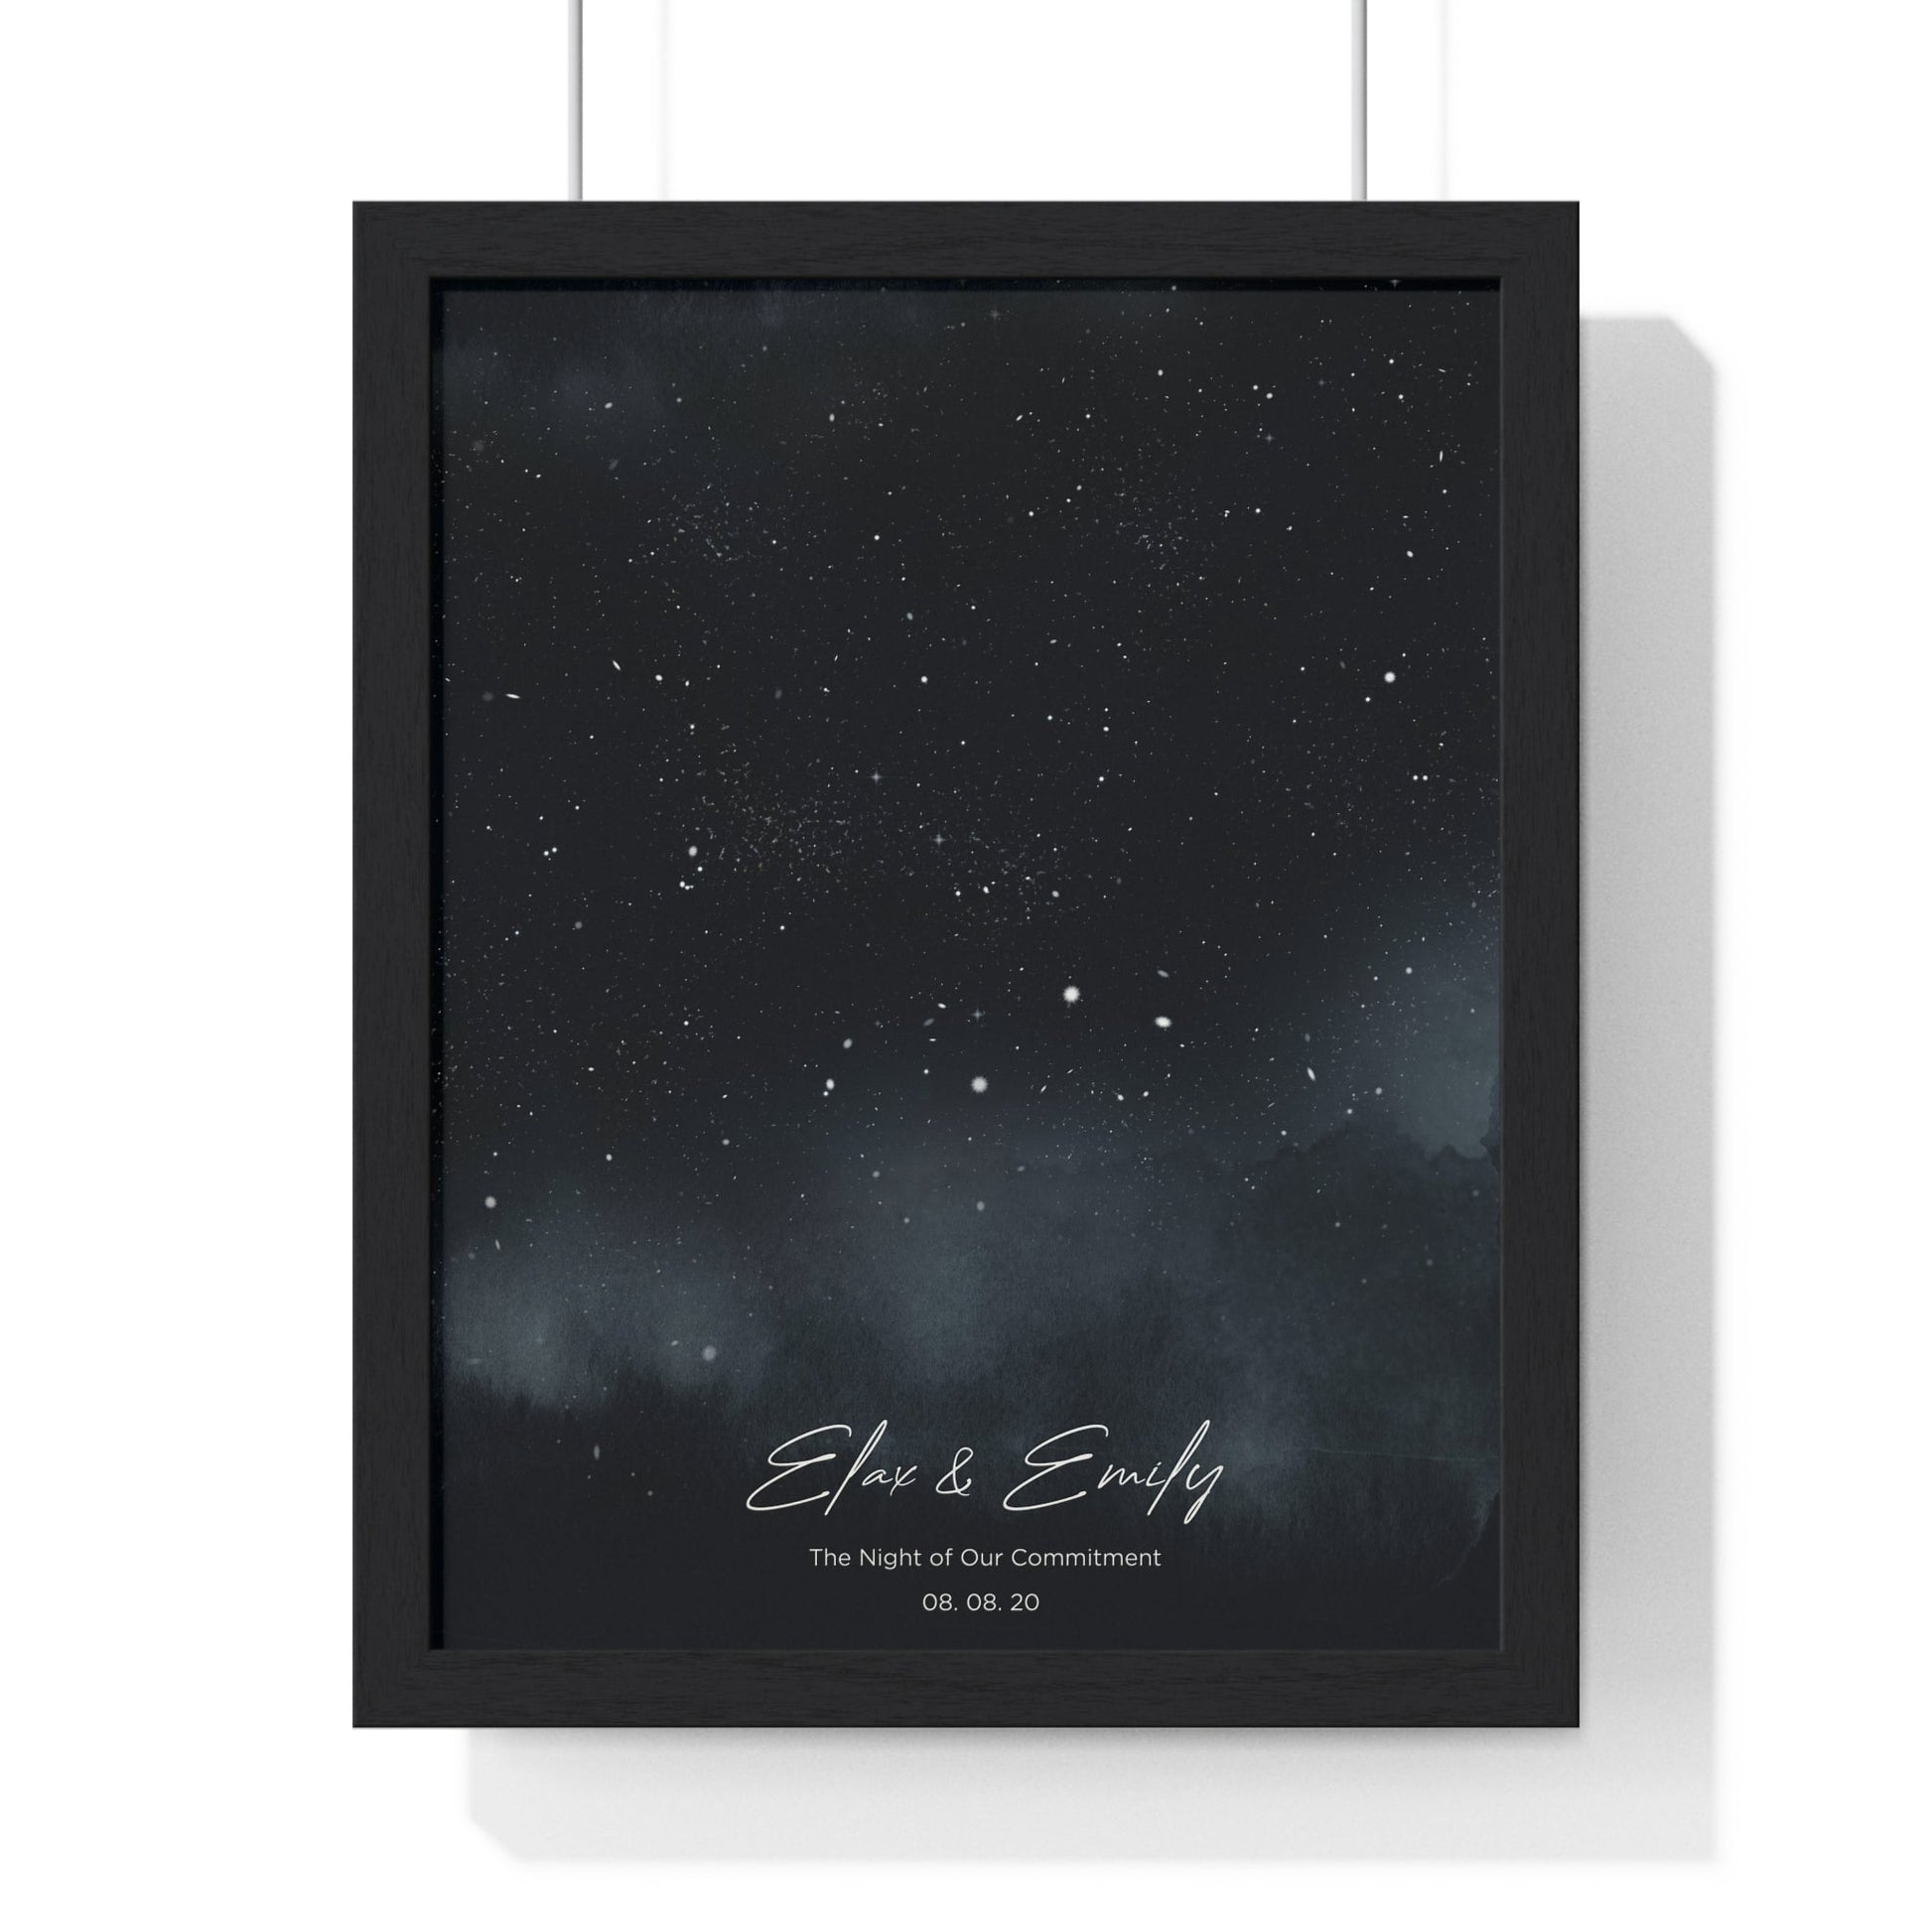 Personalized star map portrait on canvas, framed and exquisite.